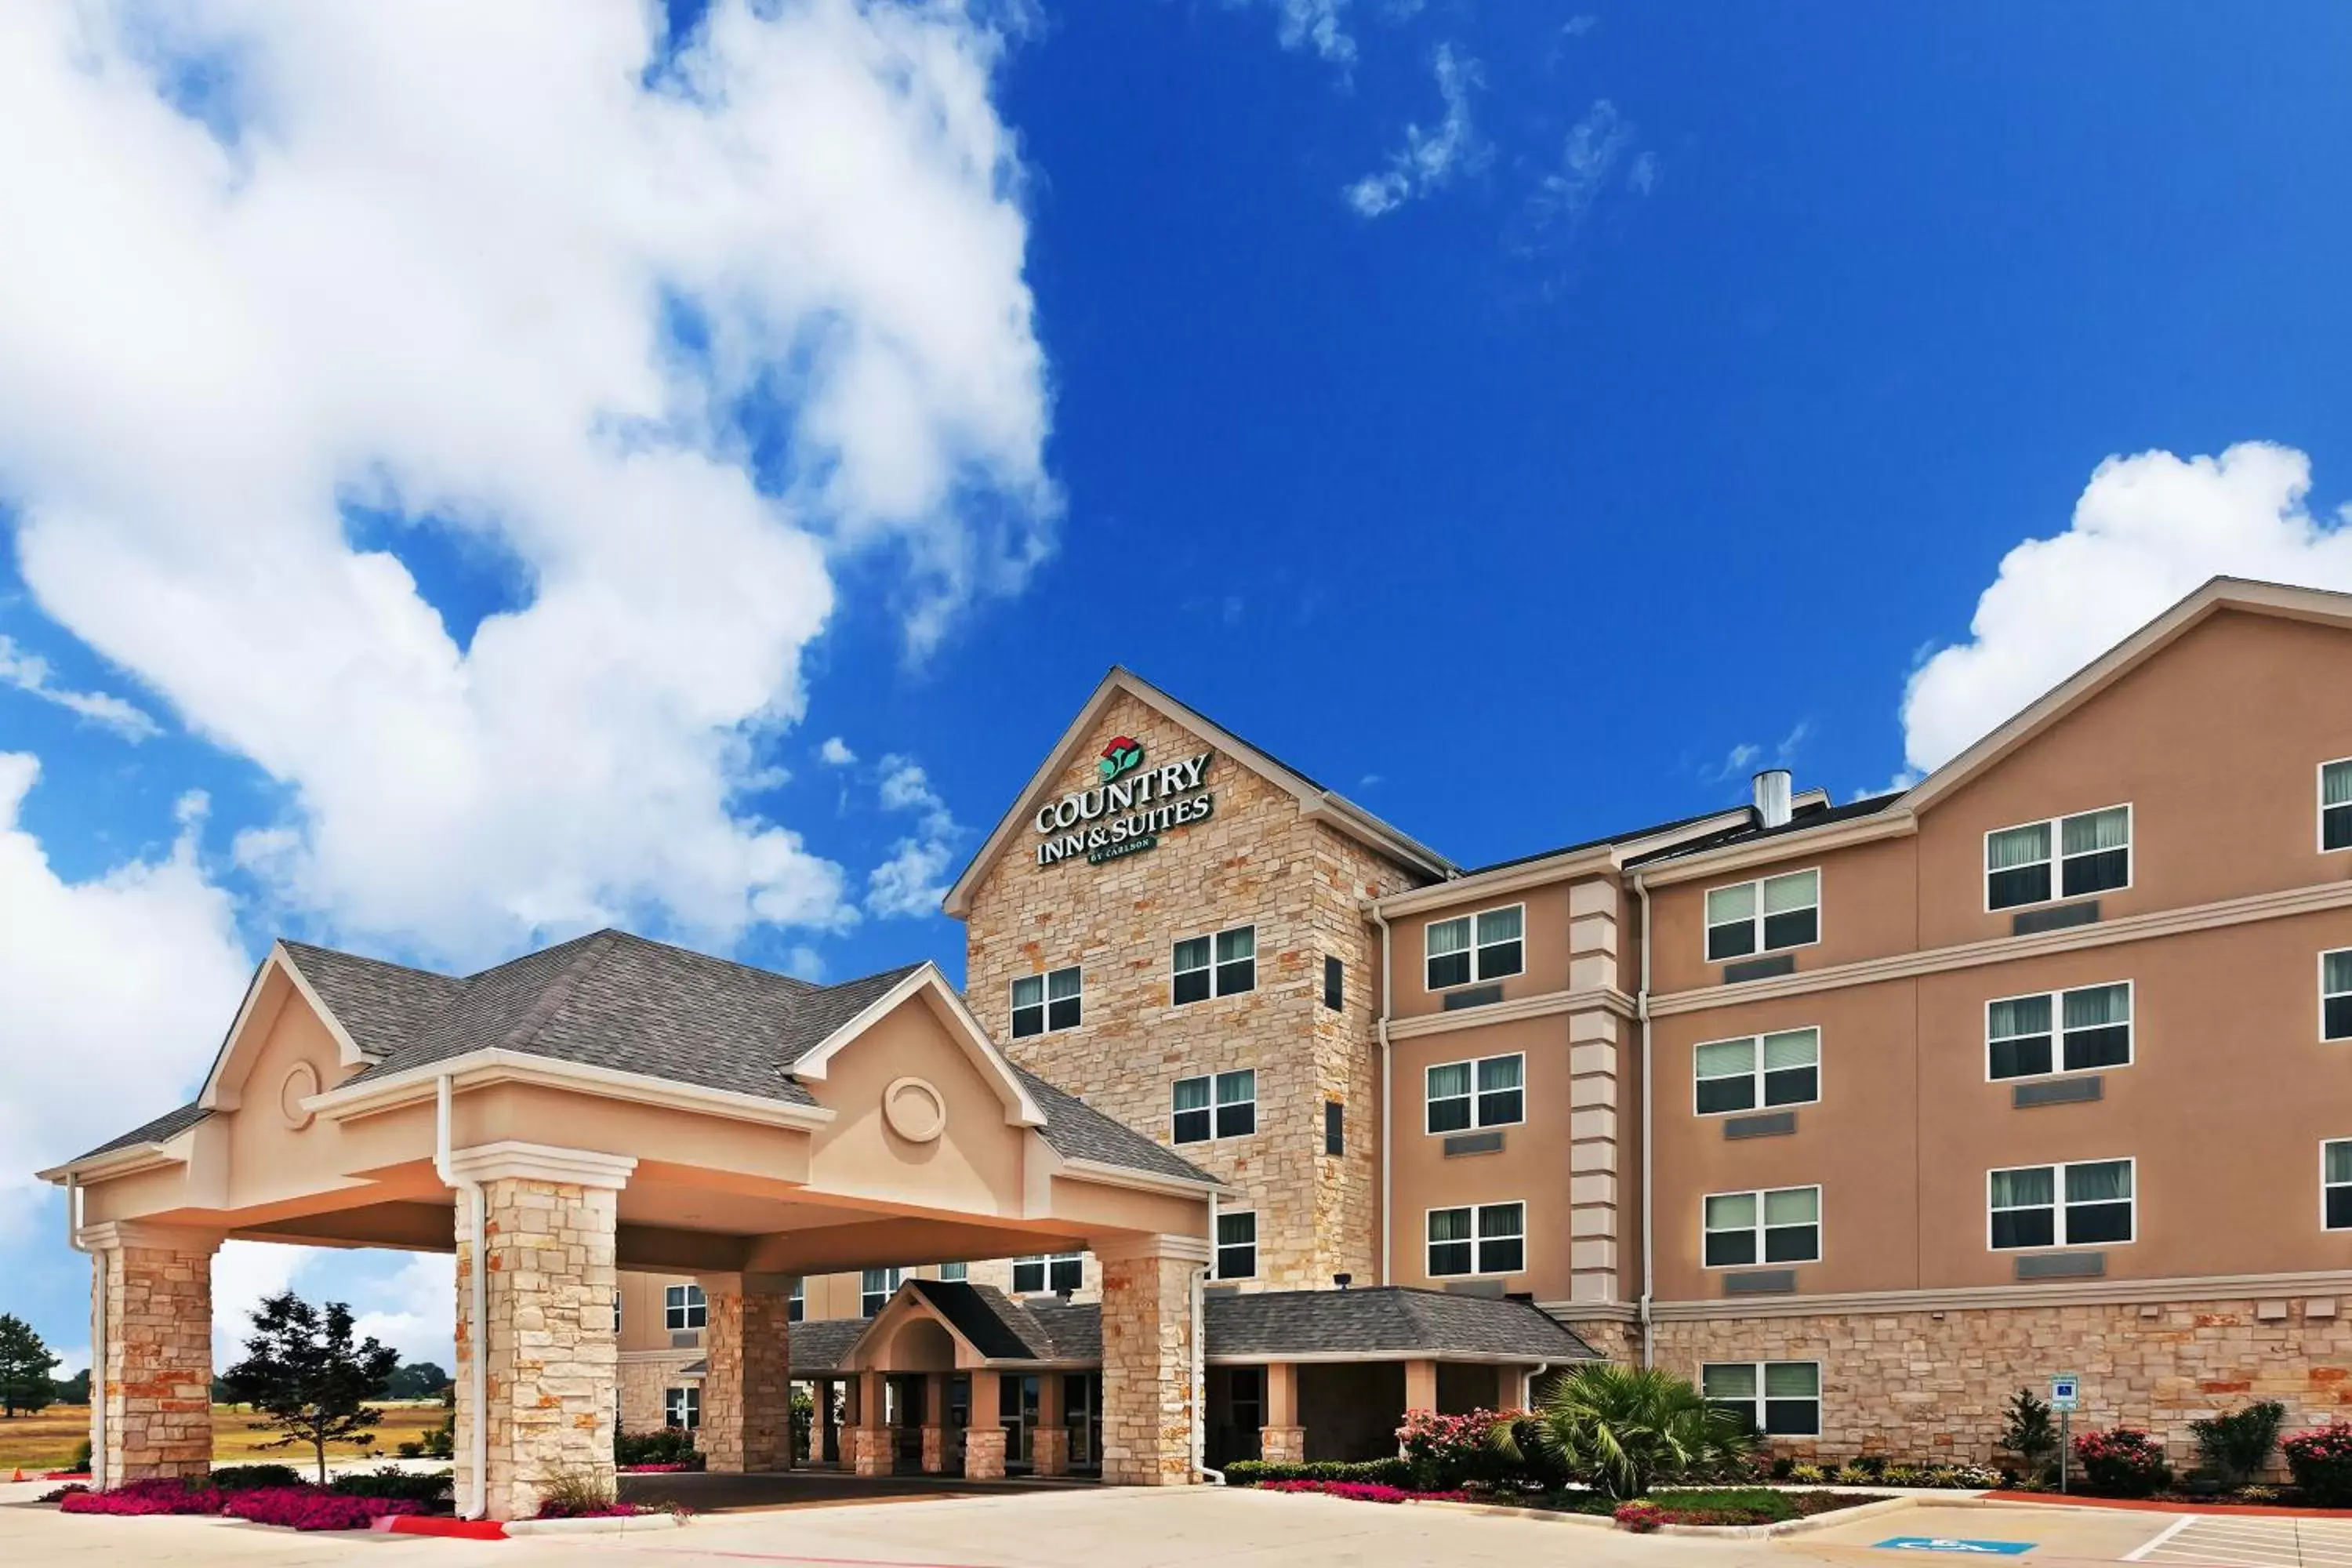 Property Building in Country Inn & Suites by Radisson, Texarkana, TX